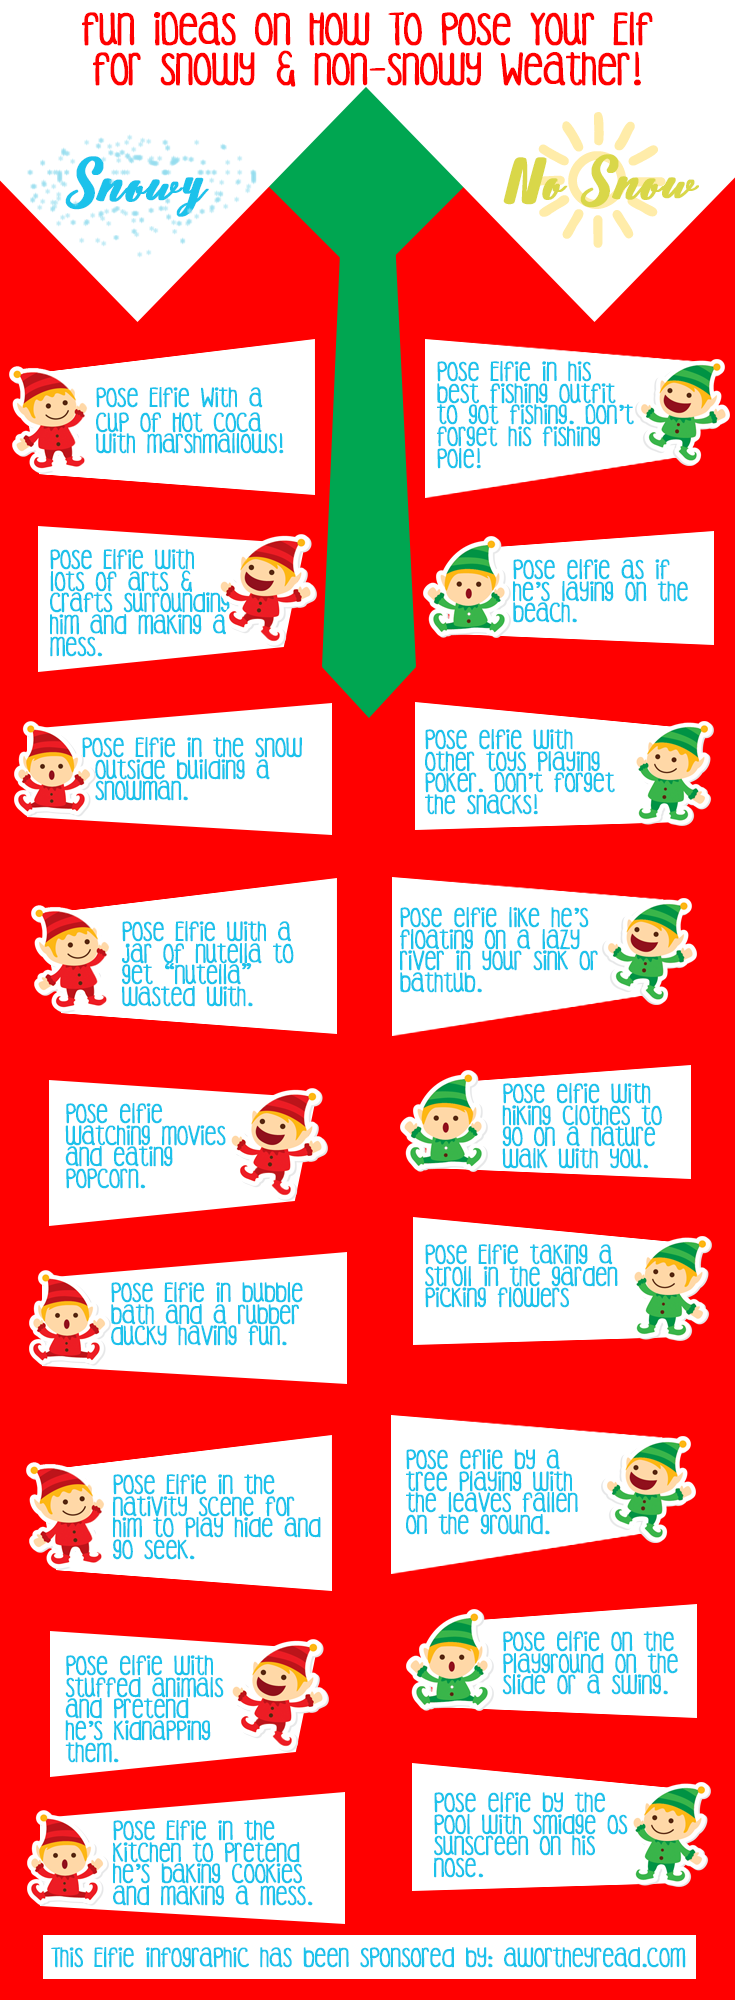 Check out our 12 Fun Elf On The Shelf Poses to help give a bit of variety to your fun holiday tradition! Grab your Elf and use these for family fun!